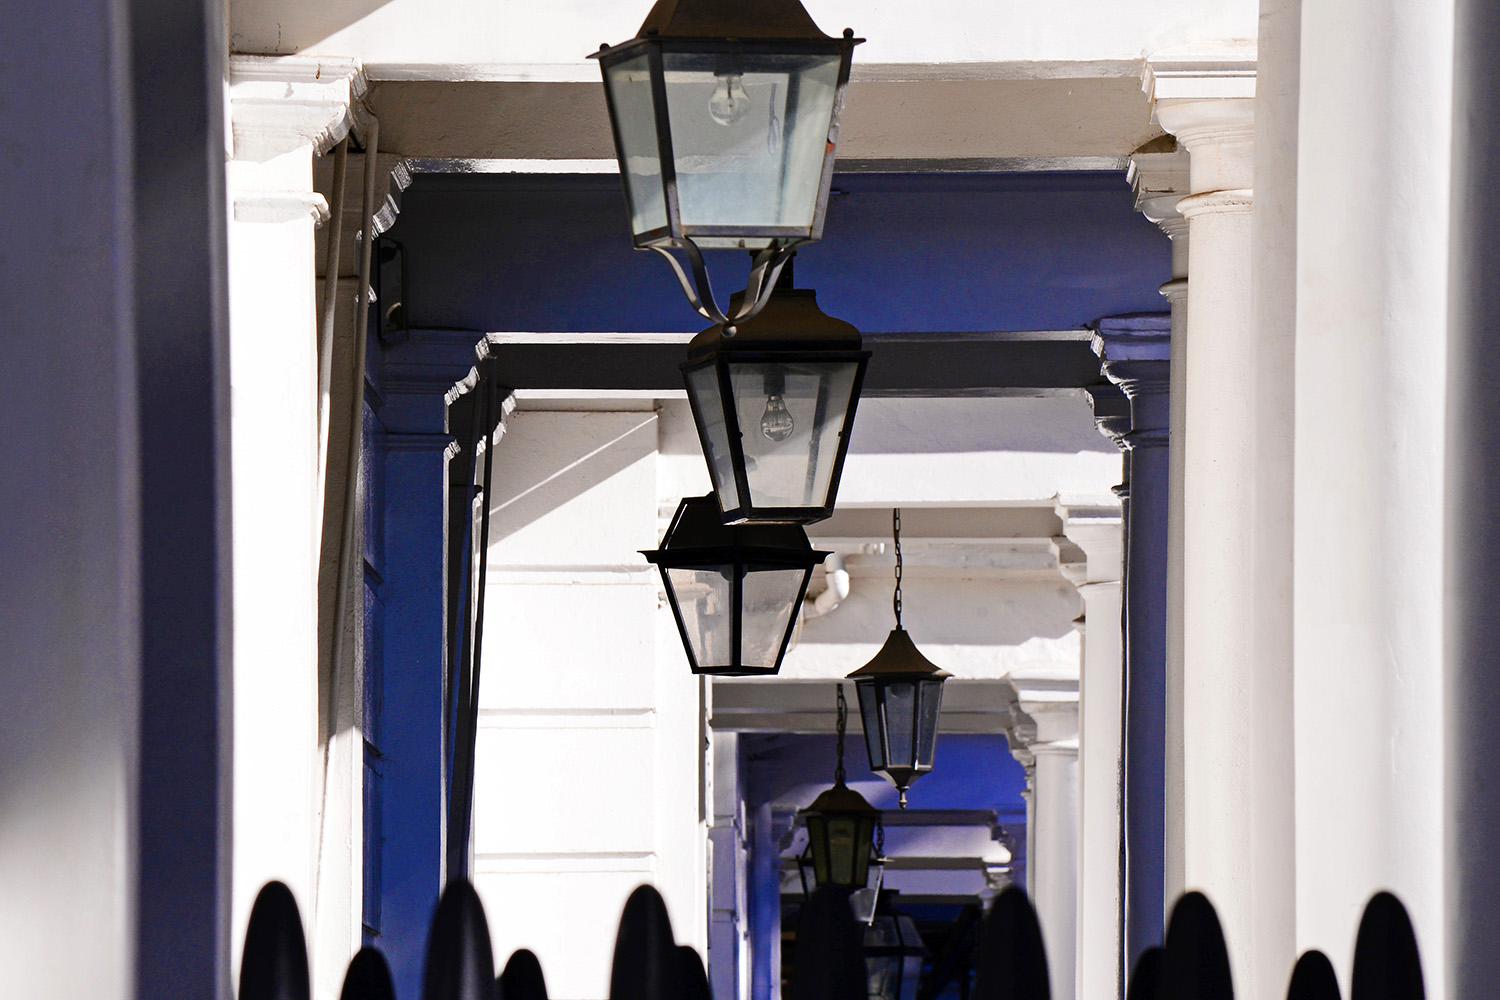 Architecture_Porch_Lamps_Light_Bulbs_Repetitive_Sequence_London_England_Travel.jpg